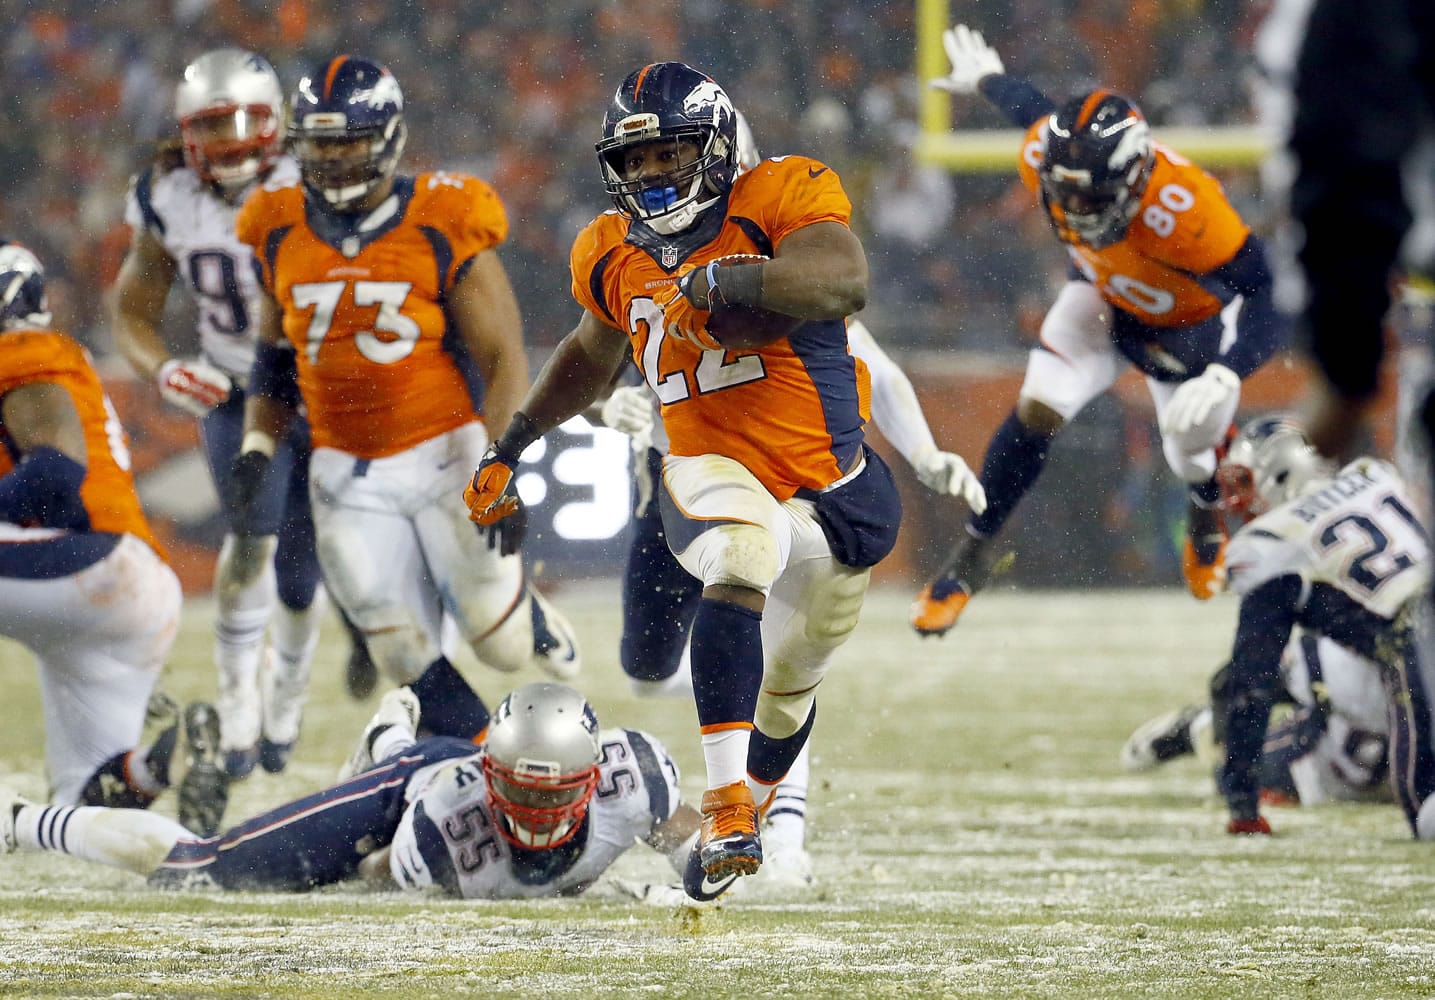 Denver Broncos running back C.J. Anderson (22) breaks free for the game-winning touchdown against the New England Patriots during overtime of an NFL football game, Sunday, Nov. 29, 2015, in Denver. The Broncos defeated the Patriots 30-24.